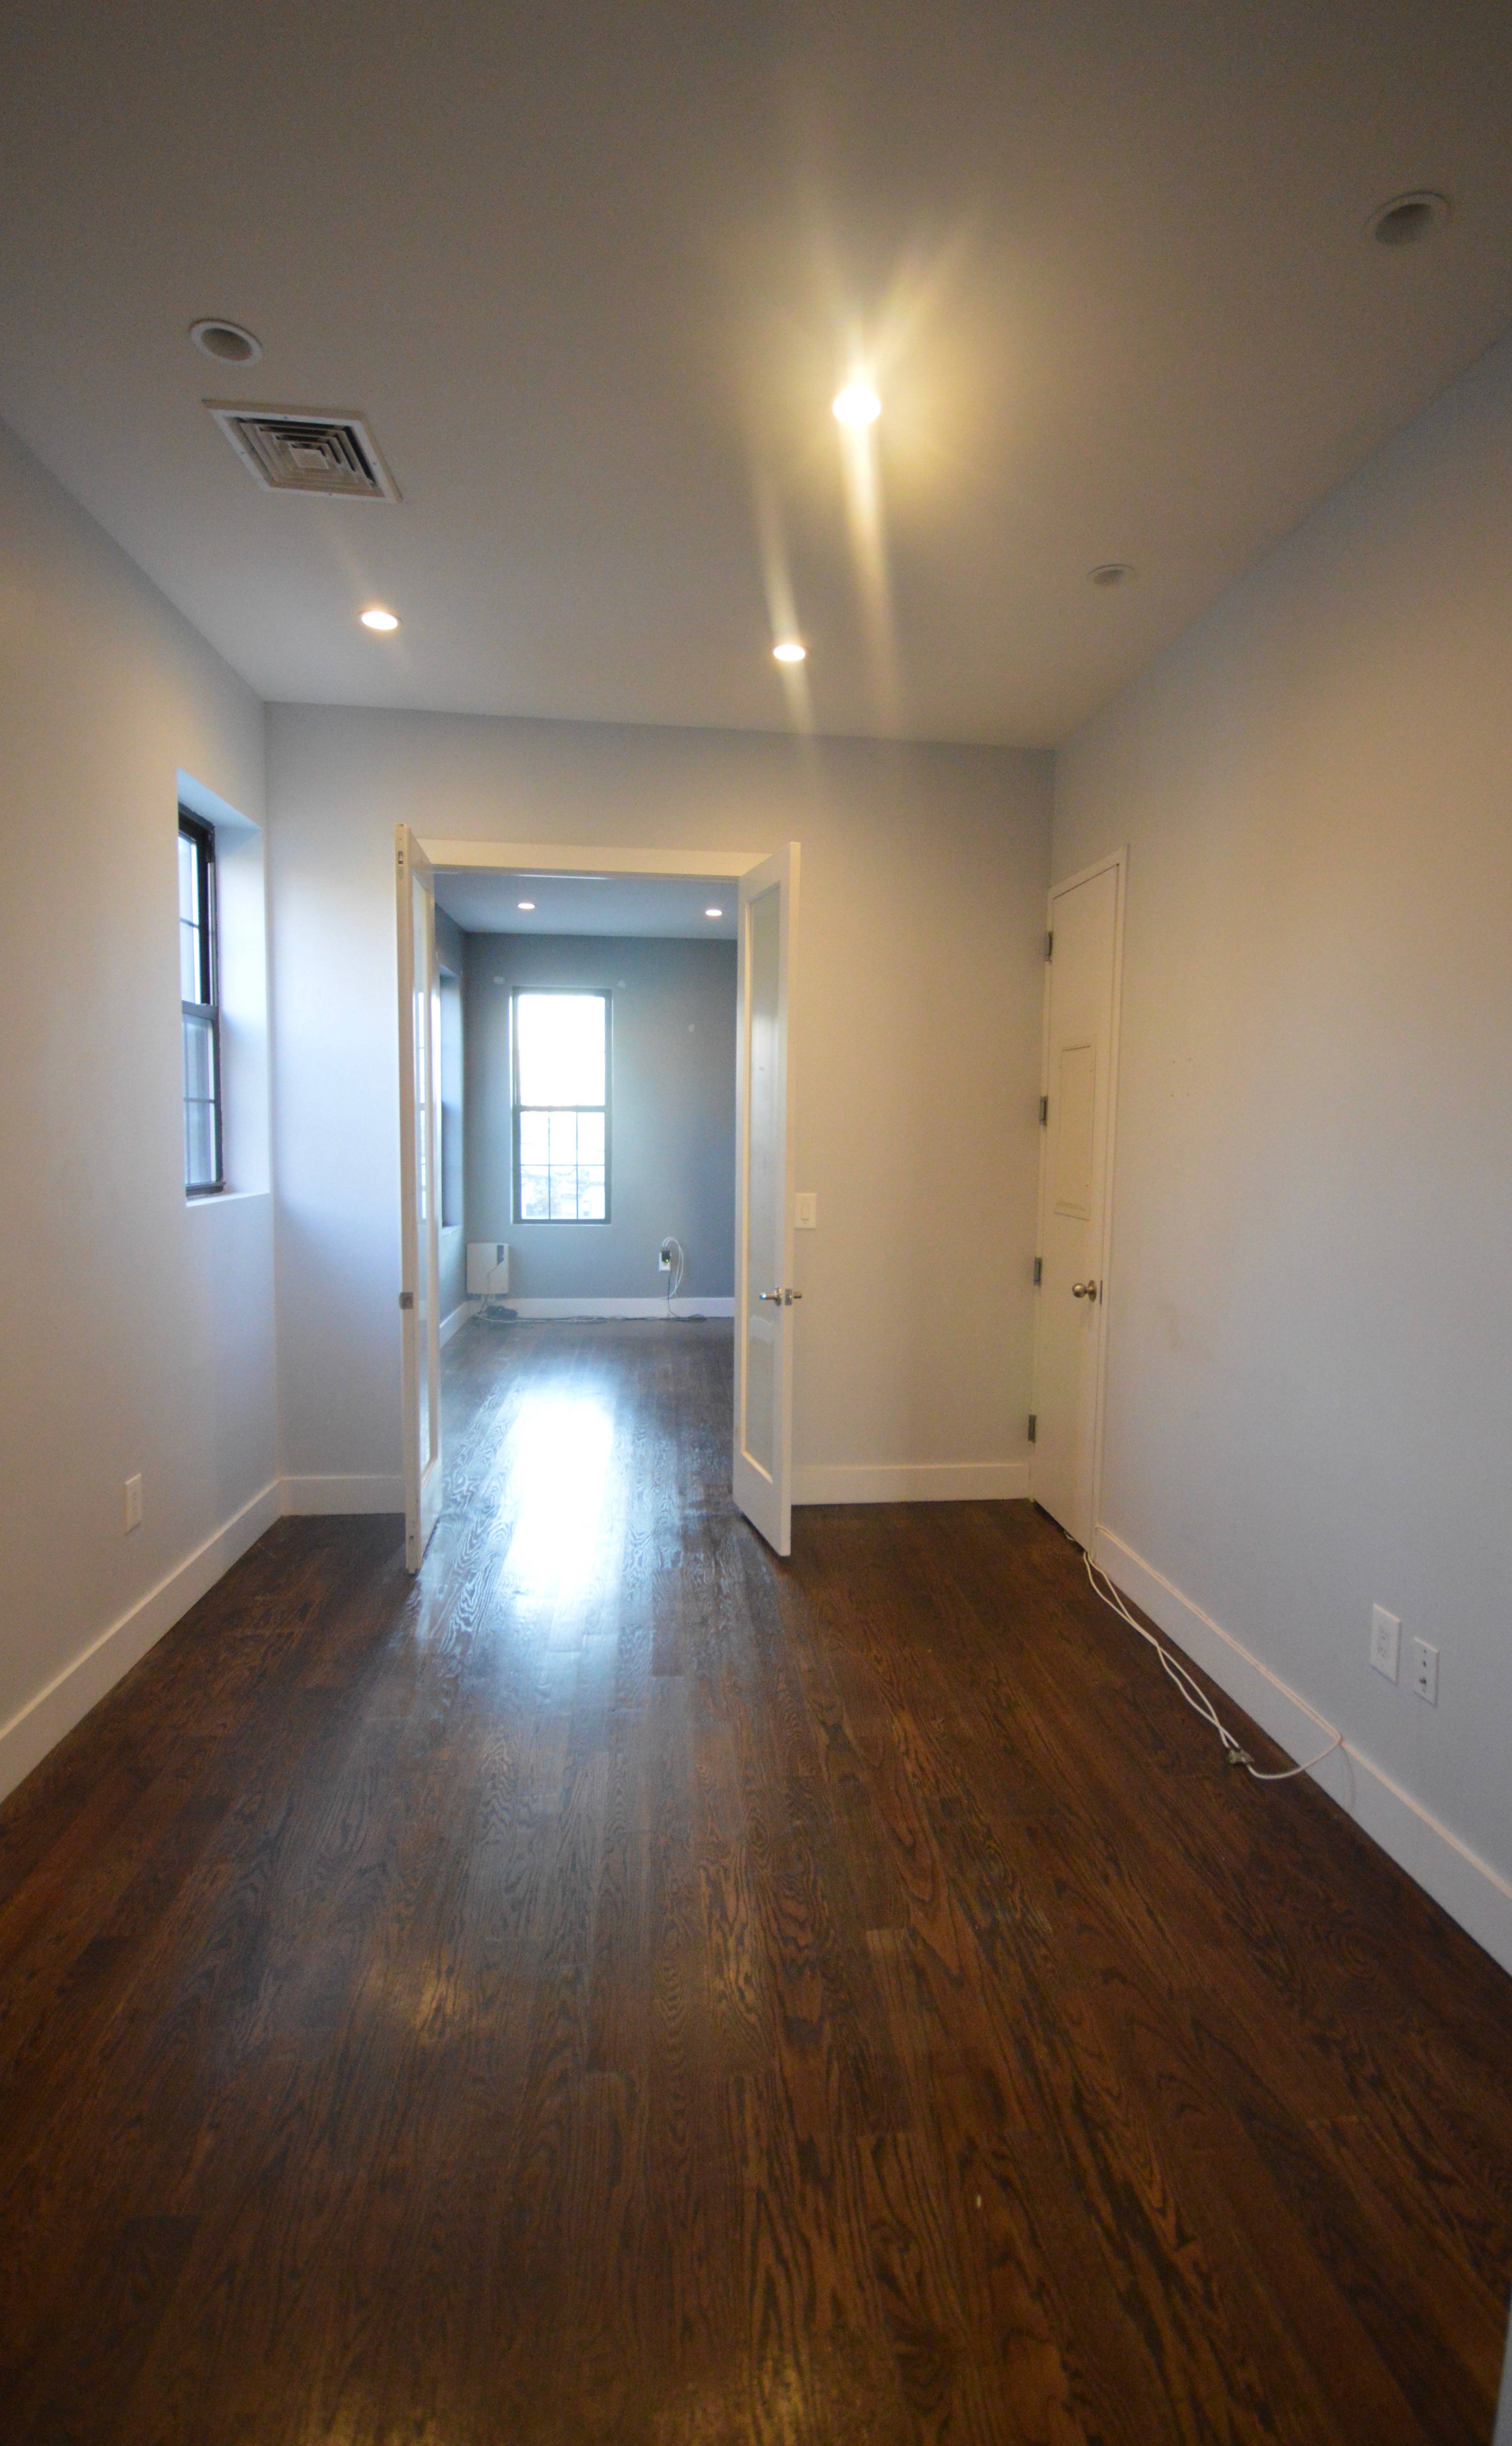 Spacious and modern 3 bedroom, one and a half bathroom apartment with high ceilings and hardwood floors throughout.